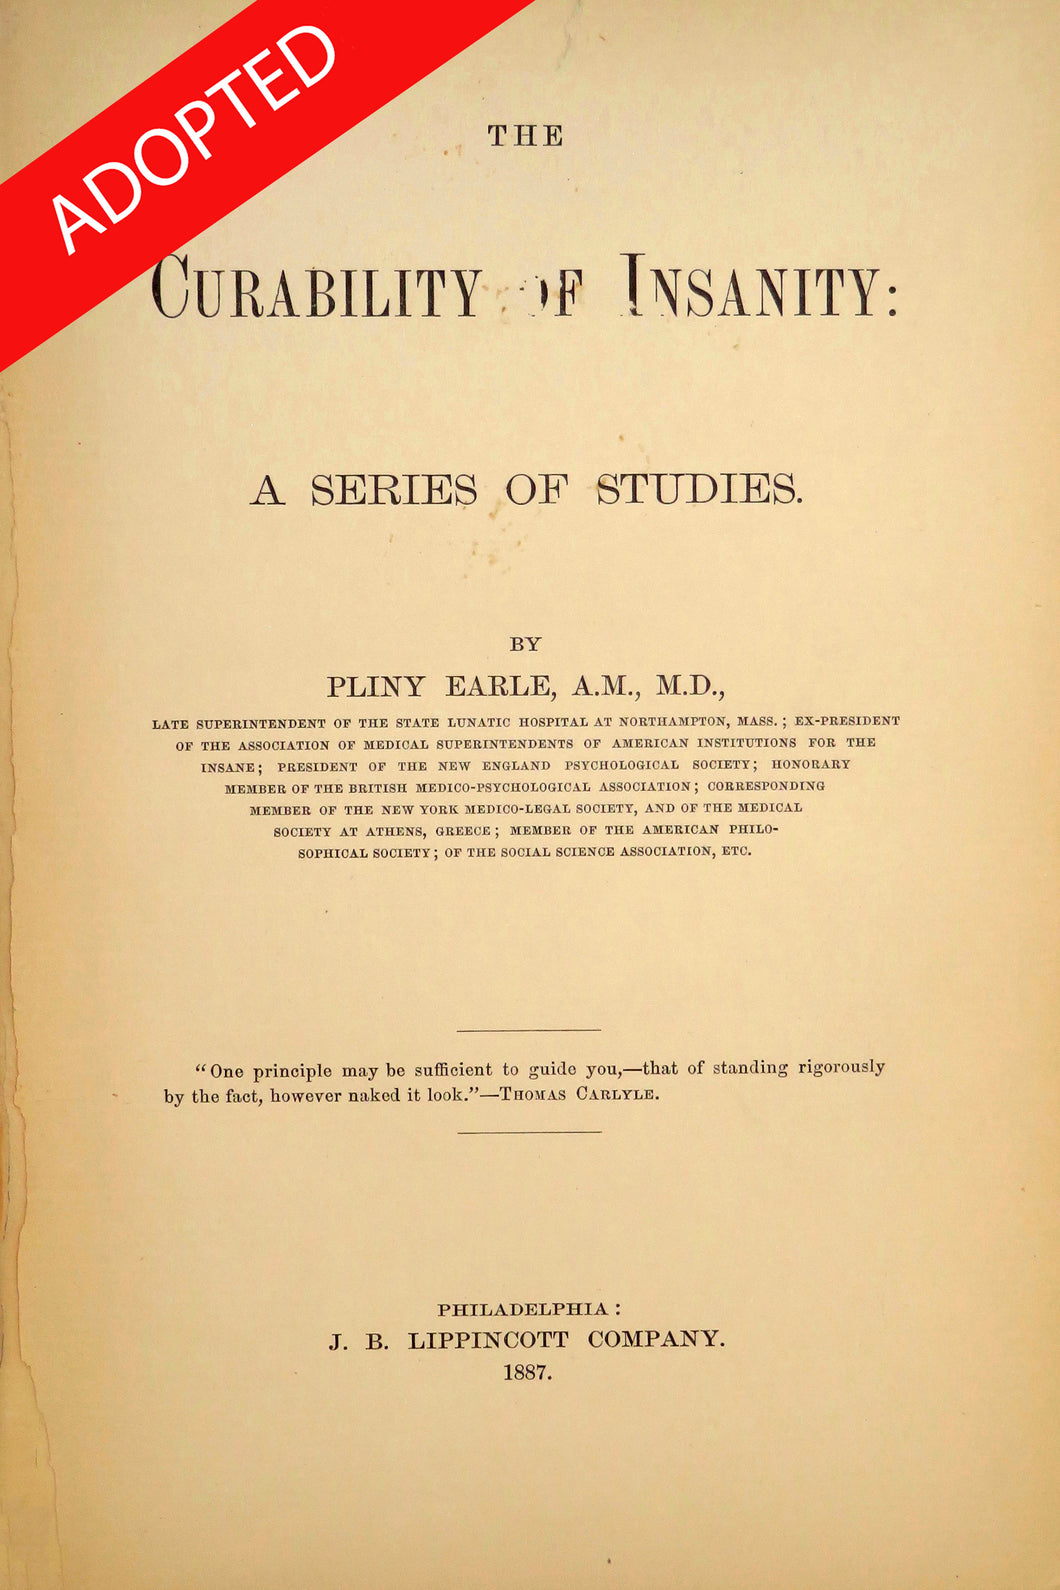 The curability of insanity: A series of studies